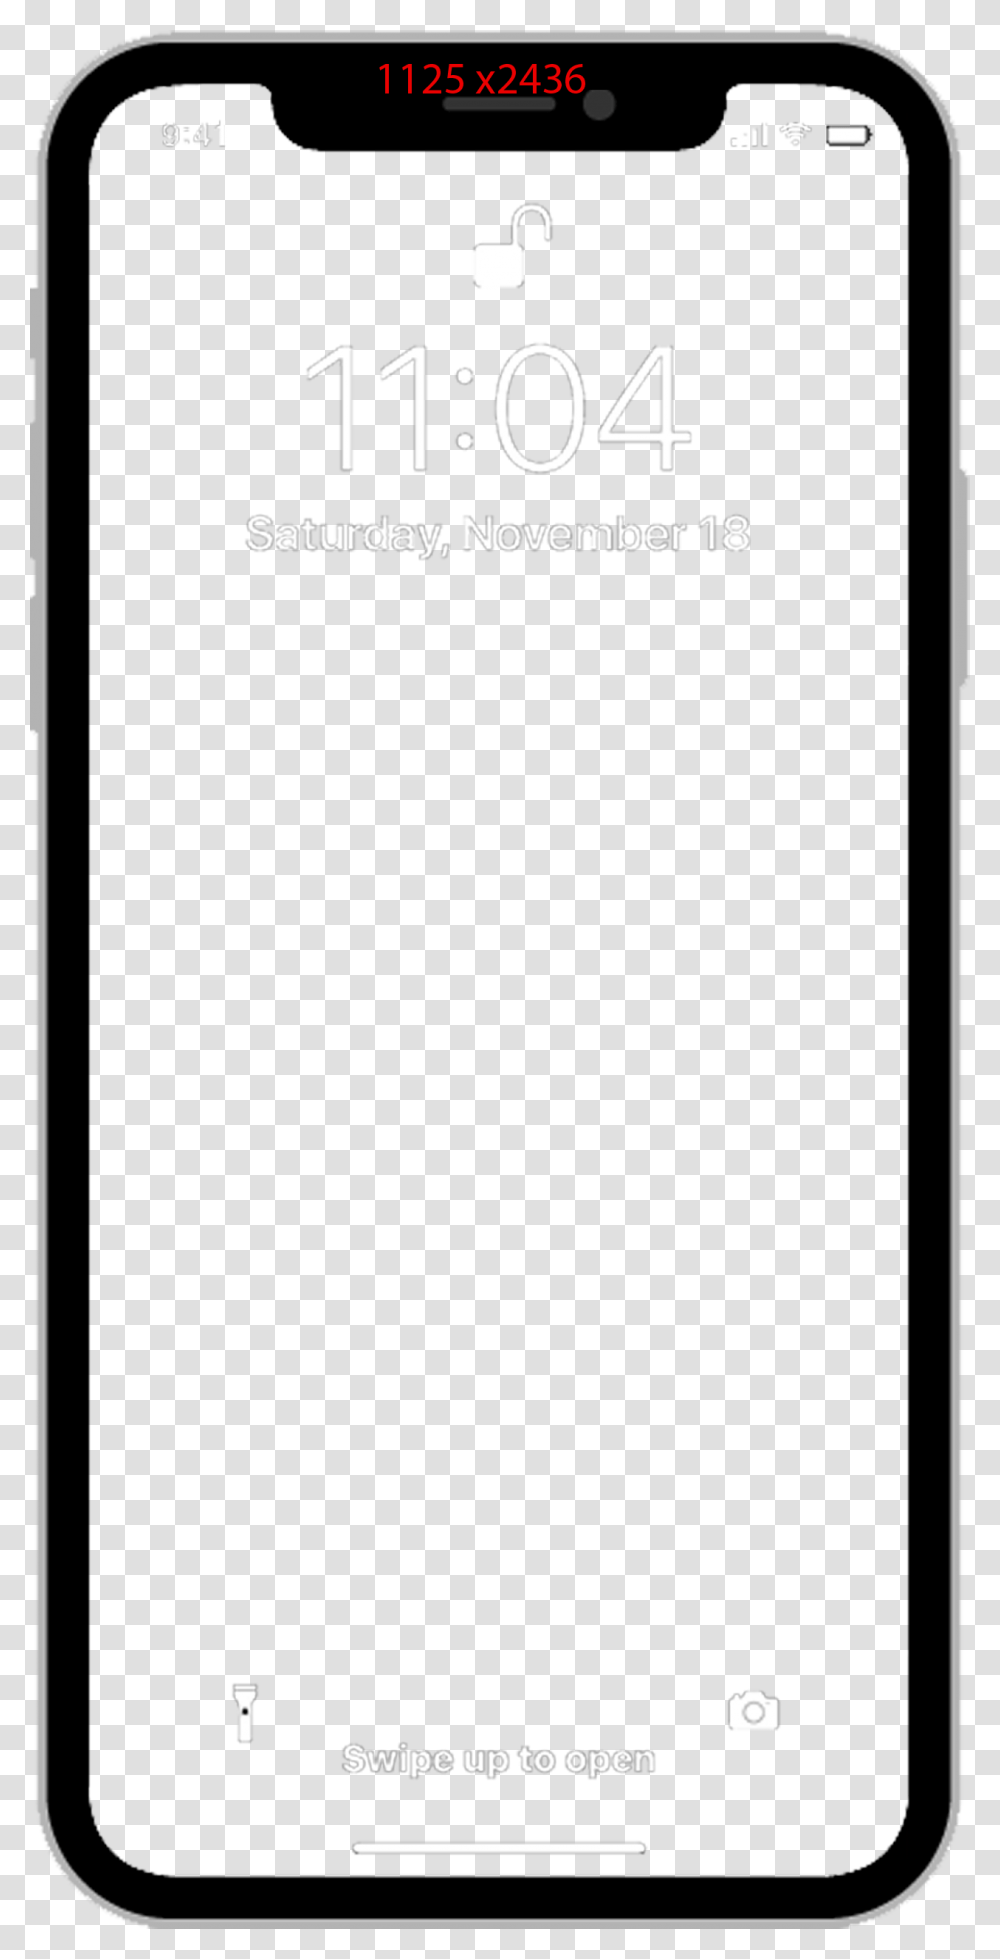 The Iphone Xxs Wallpaper Thread, Electronics, White Board, Dishwasher Transparent Png